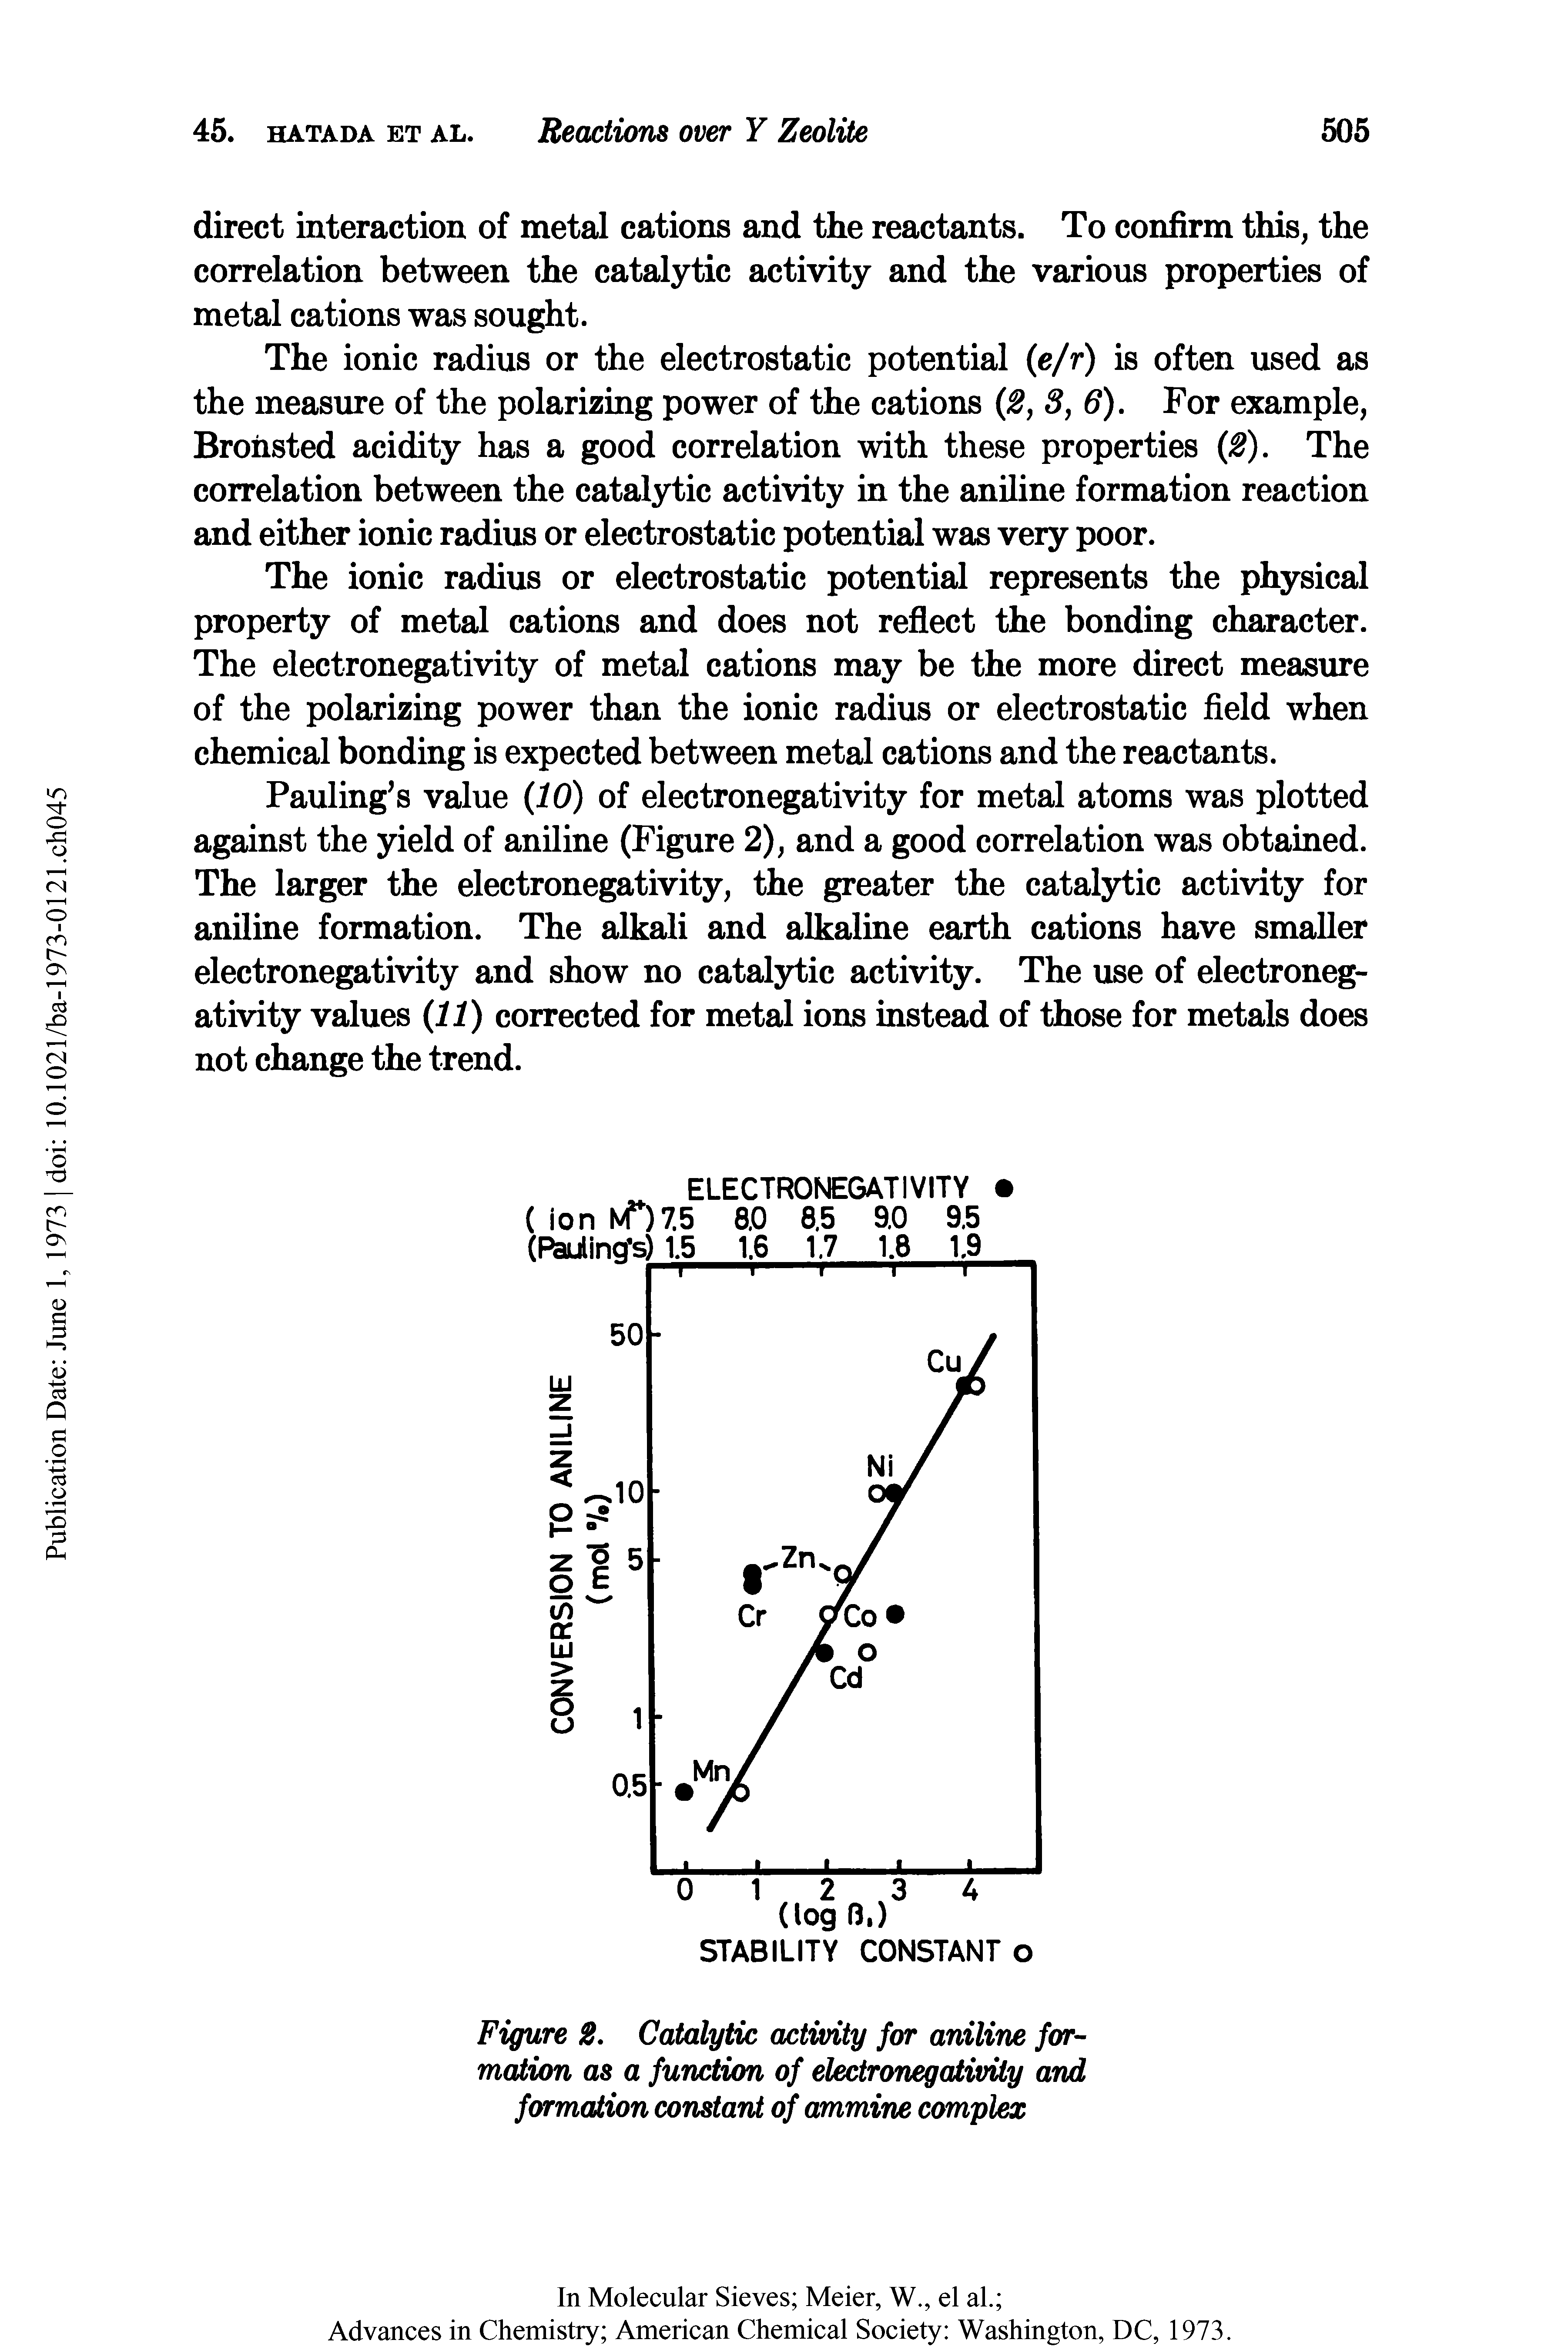 Figure 2. Catalytic activity for aniline formation as a function of electronegativity and formaiion constant of ammine complex...